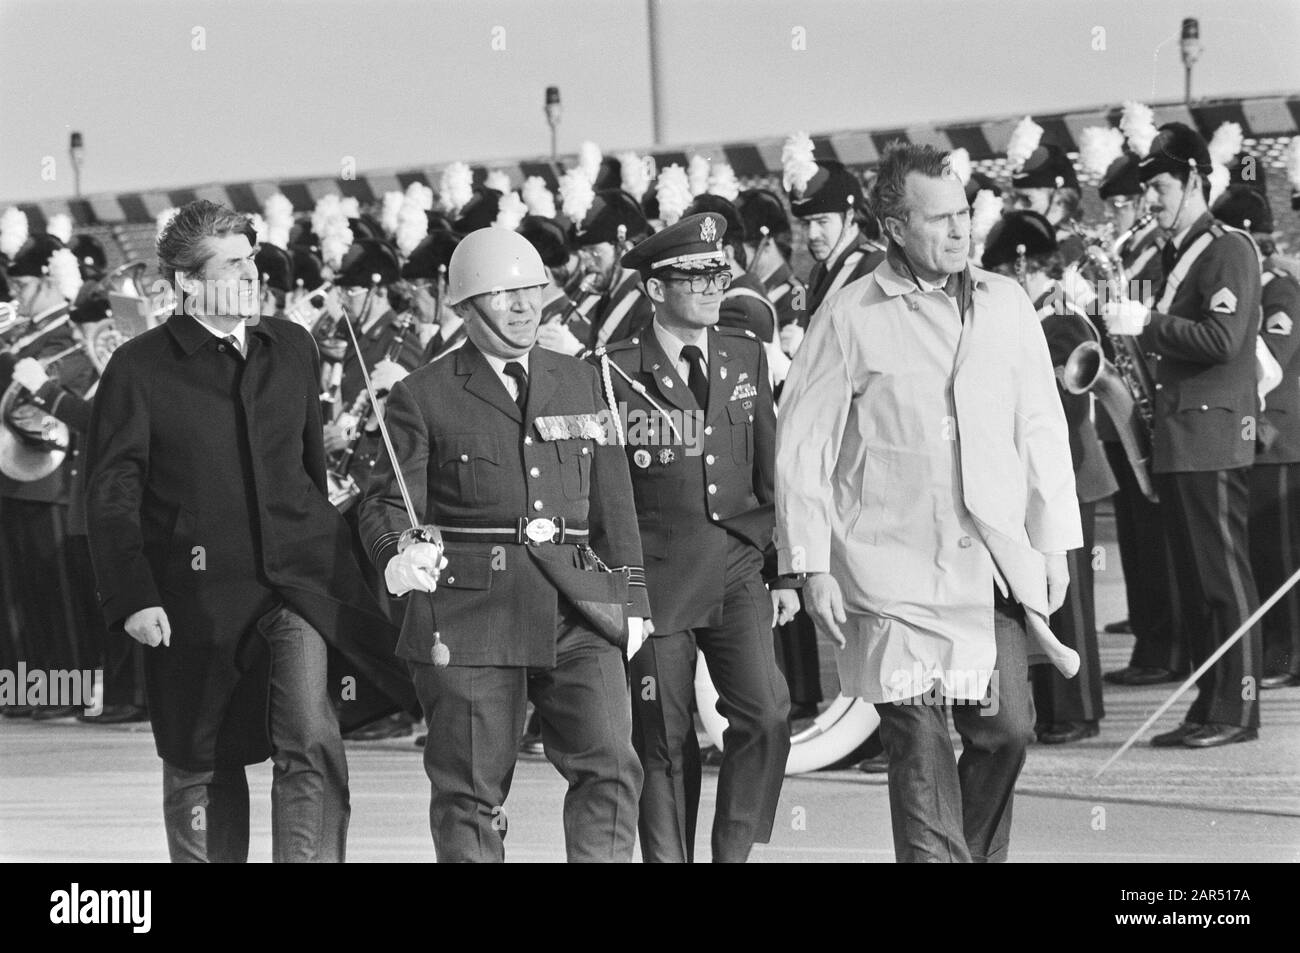 Visit of US Vice President George Bush  George Bush (Sr.) and Prime Minister Lubbers inspect the honour guard at the arrival at Schiphol Date: 1 February 1983 Location: Noord-Holland, Schiphol Keywords : arrival and departure, military, prime ministers, ceremonies, state visits Personal name: Bush, George, Lubbers, Ruud Stock Photo